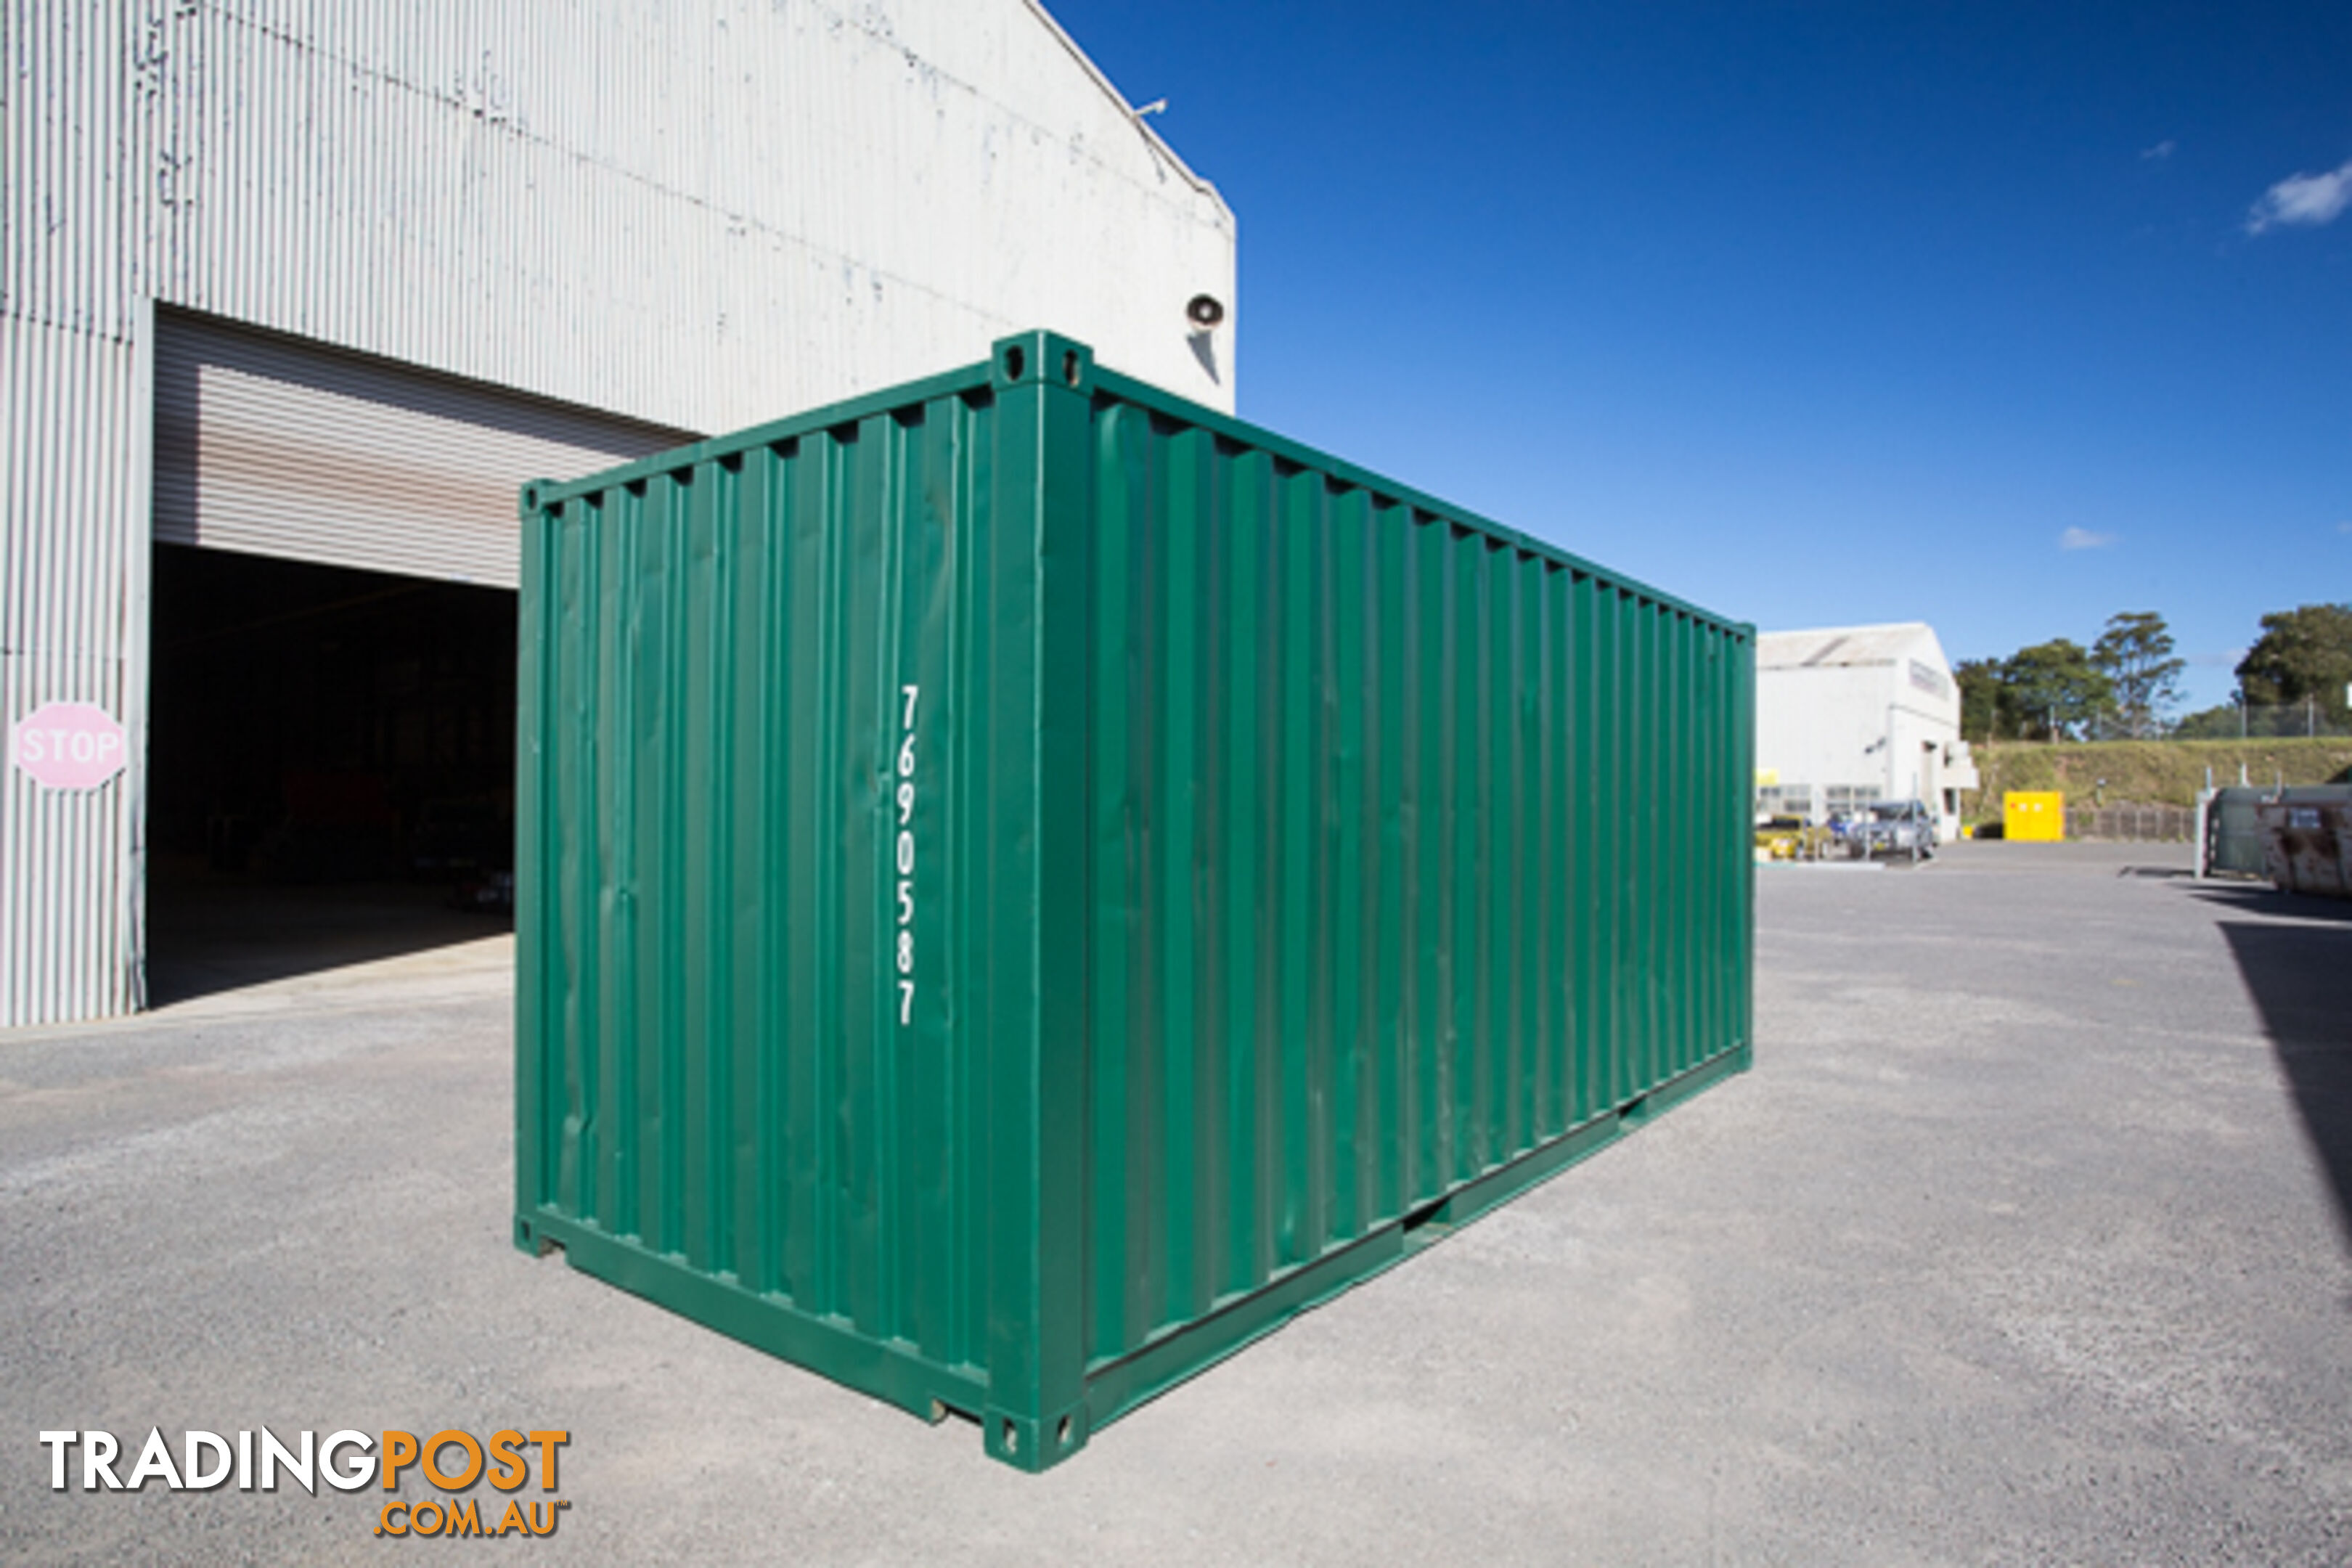 Refurbished Painted 20ft Shipping Containers Crows Nest - From $3900 + GST